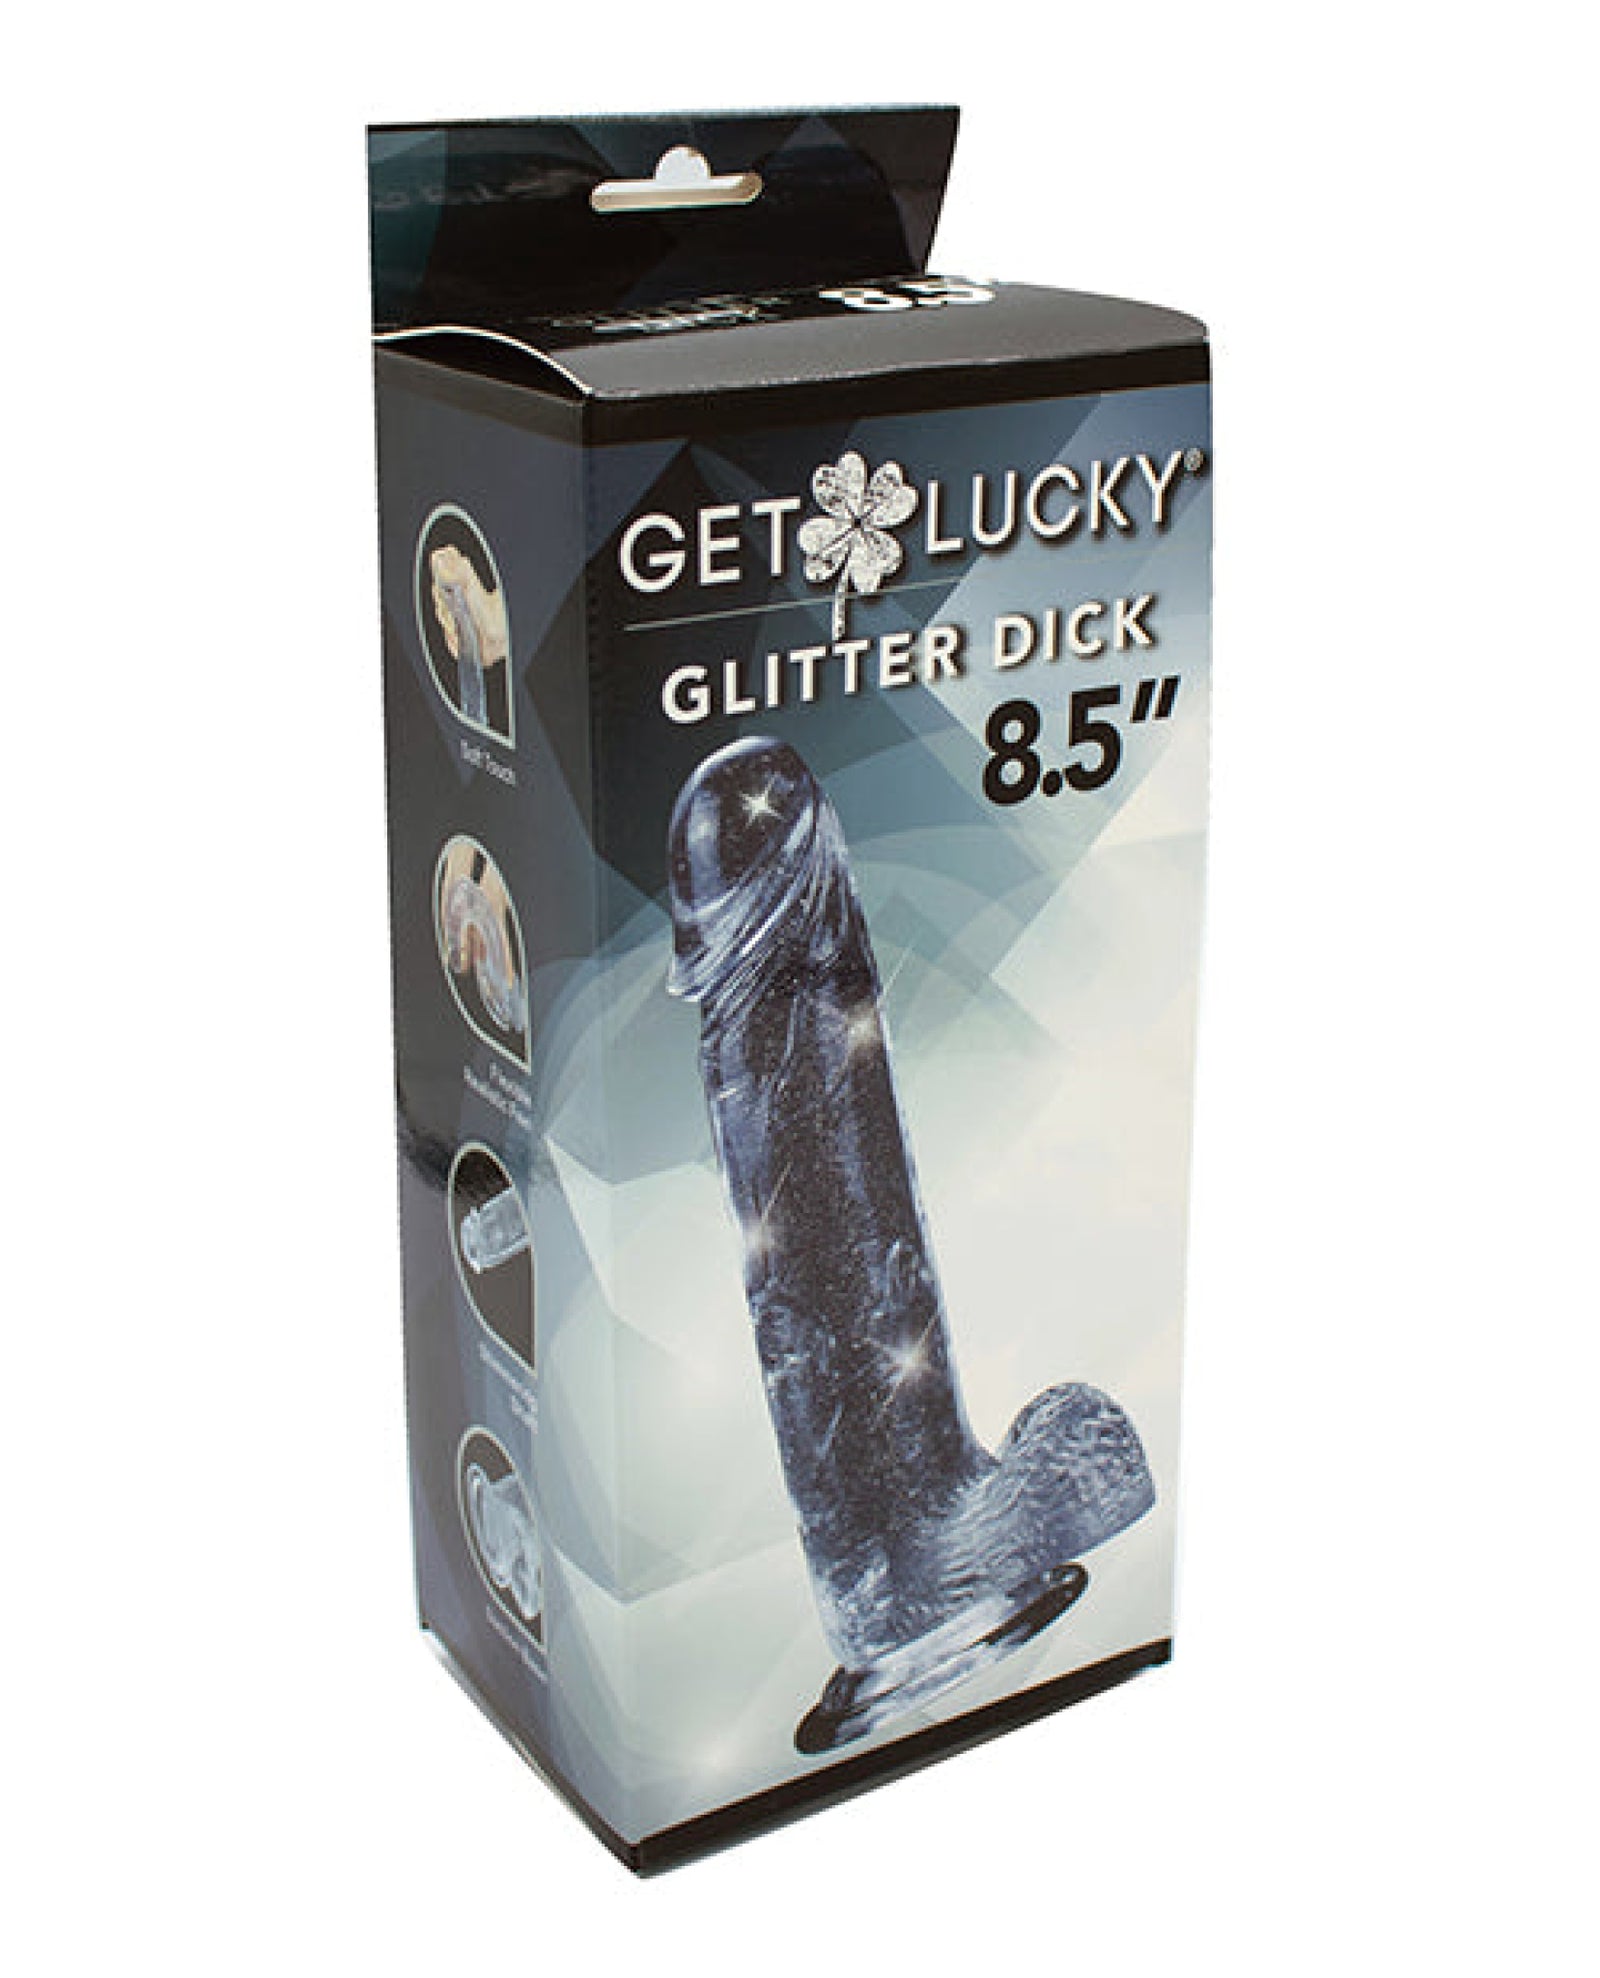 Get Lucky 8.5" Real Skin Glitter Dick - Clear Get Lucky